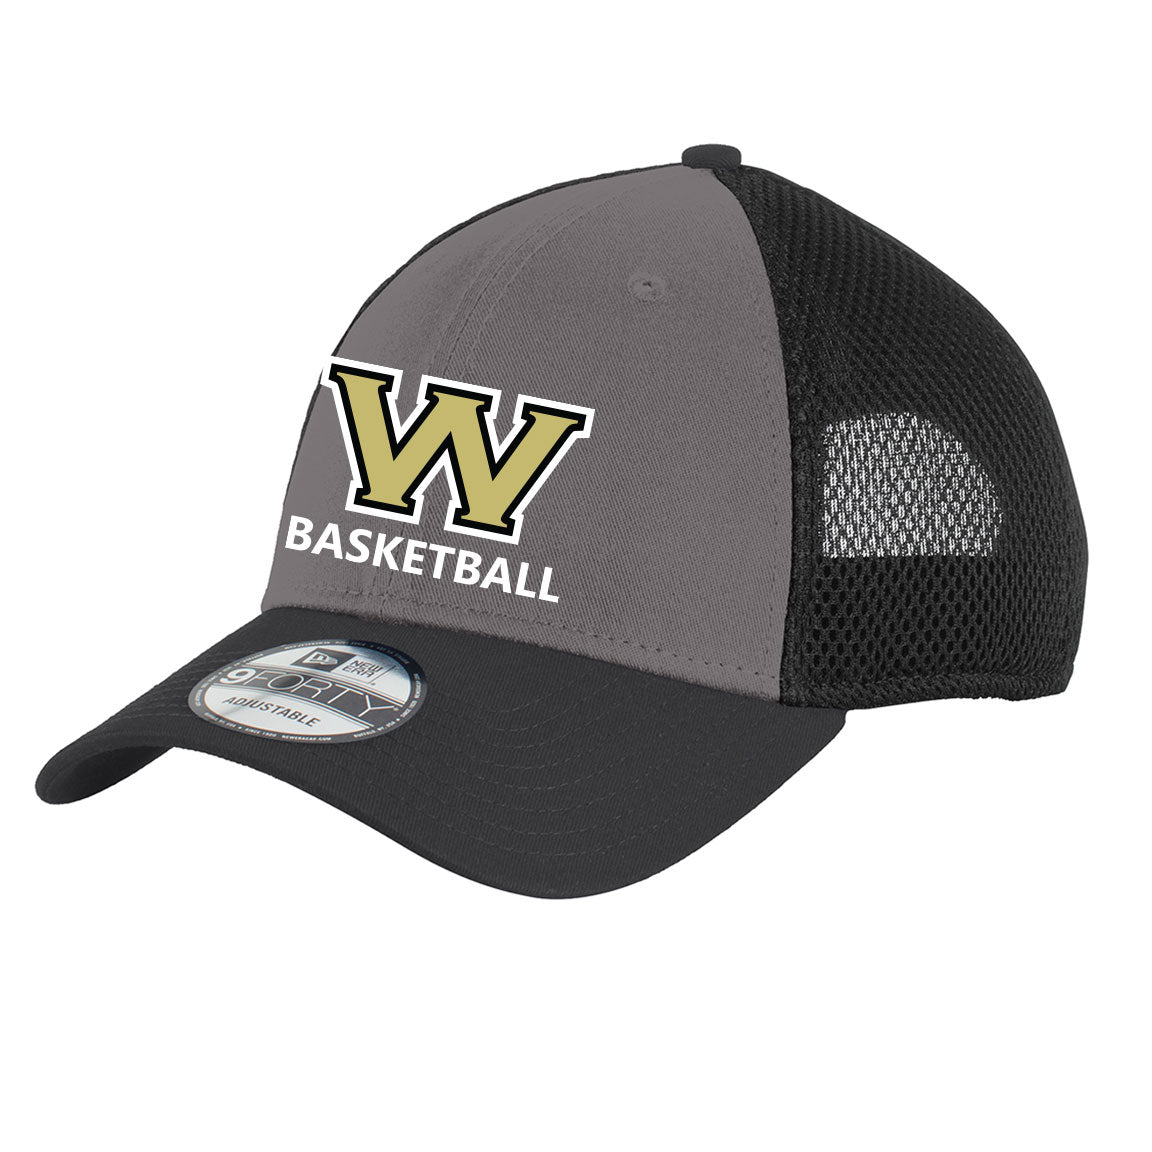 Wolverine Basketball  New Era Snapback Contrast Front Mesh Cap - Classic Embroidery